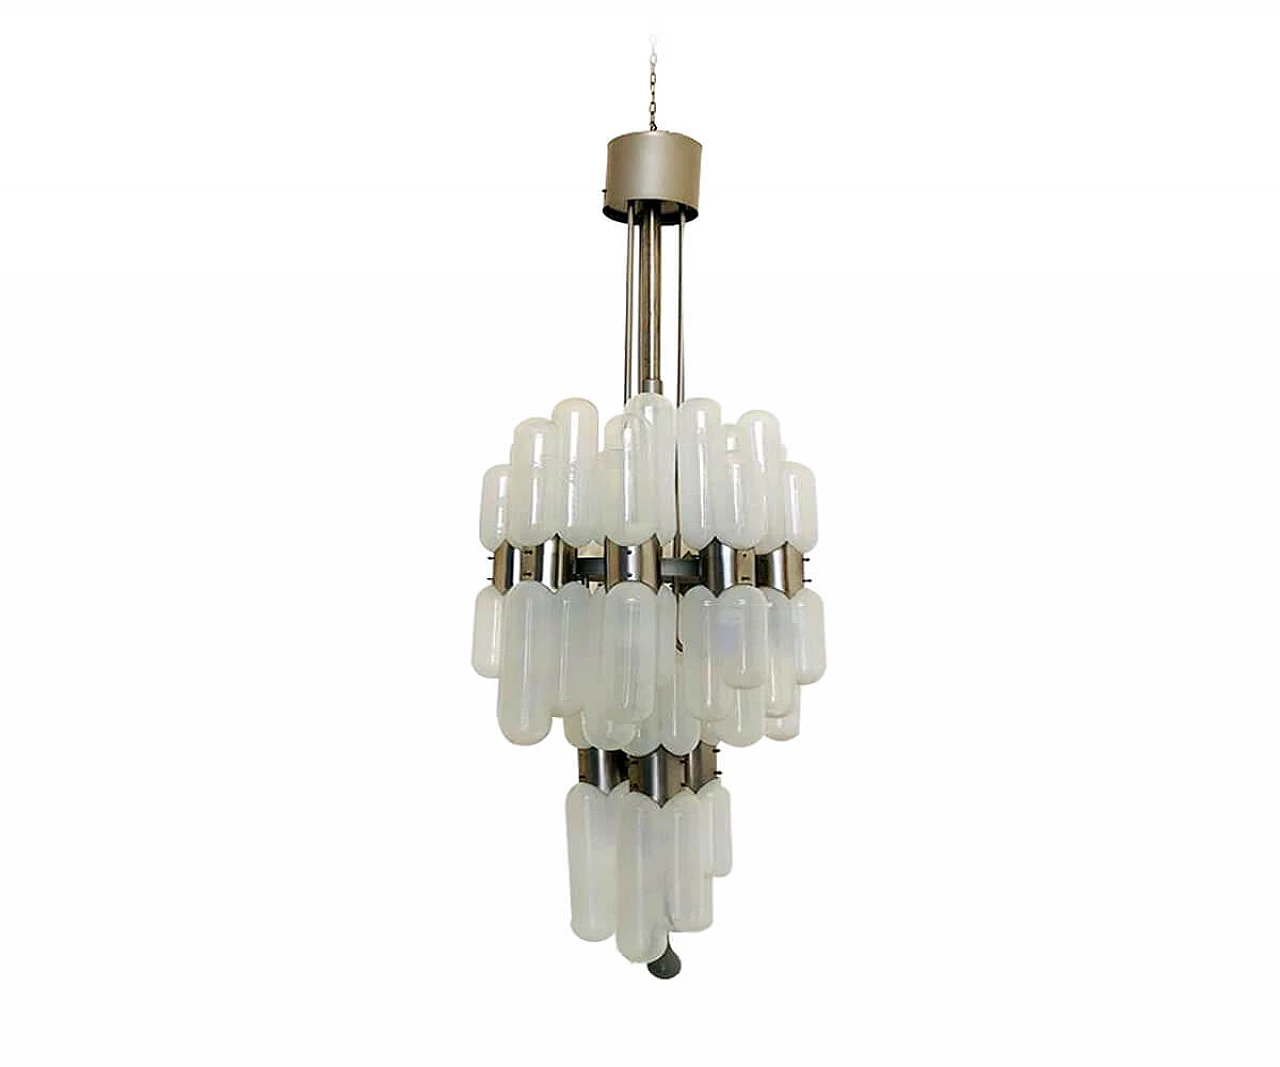 Tornado ceiling lamp by Carlo Nason for Mazzega with 24 Murano glass lights, Italy, 60s 1066005